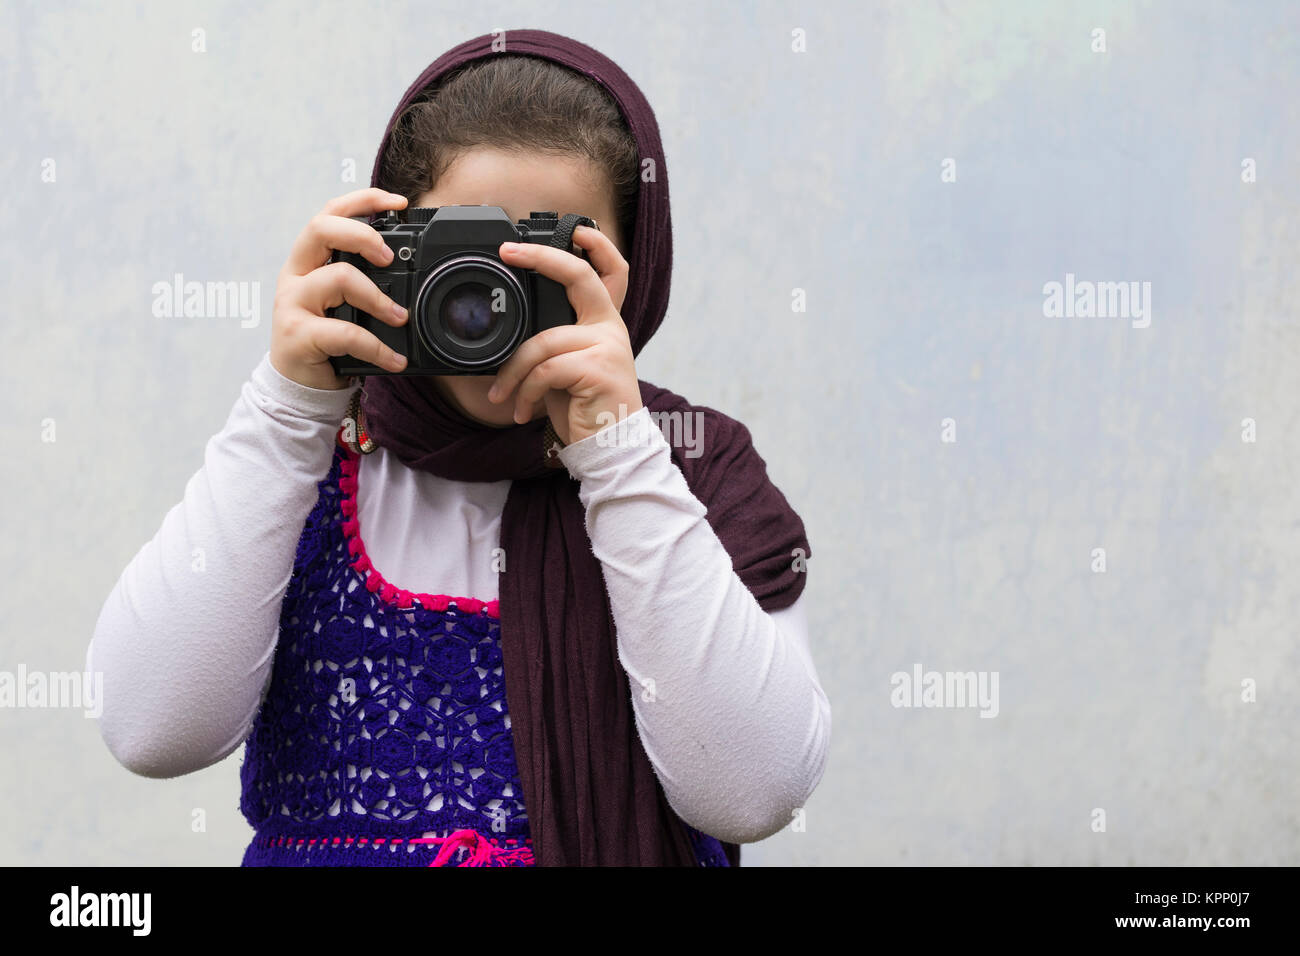 Young Little Girl Is Taking Photograph by An old Analogue Camera Strapped on Her Neck. Stock Photo